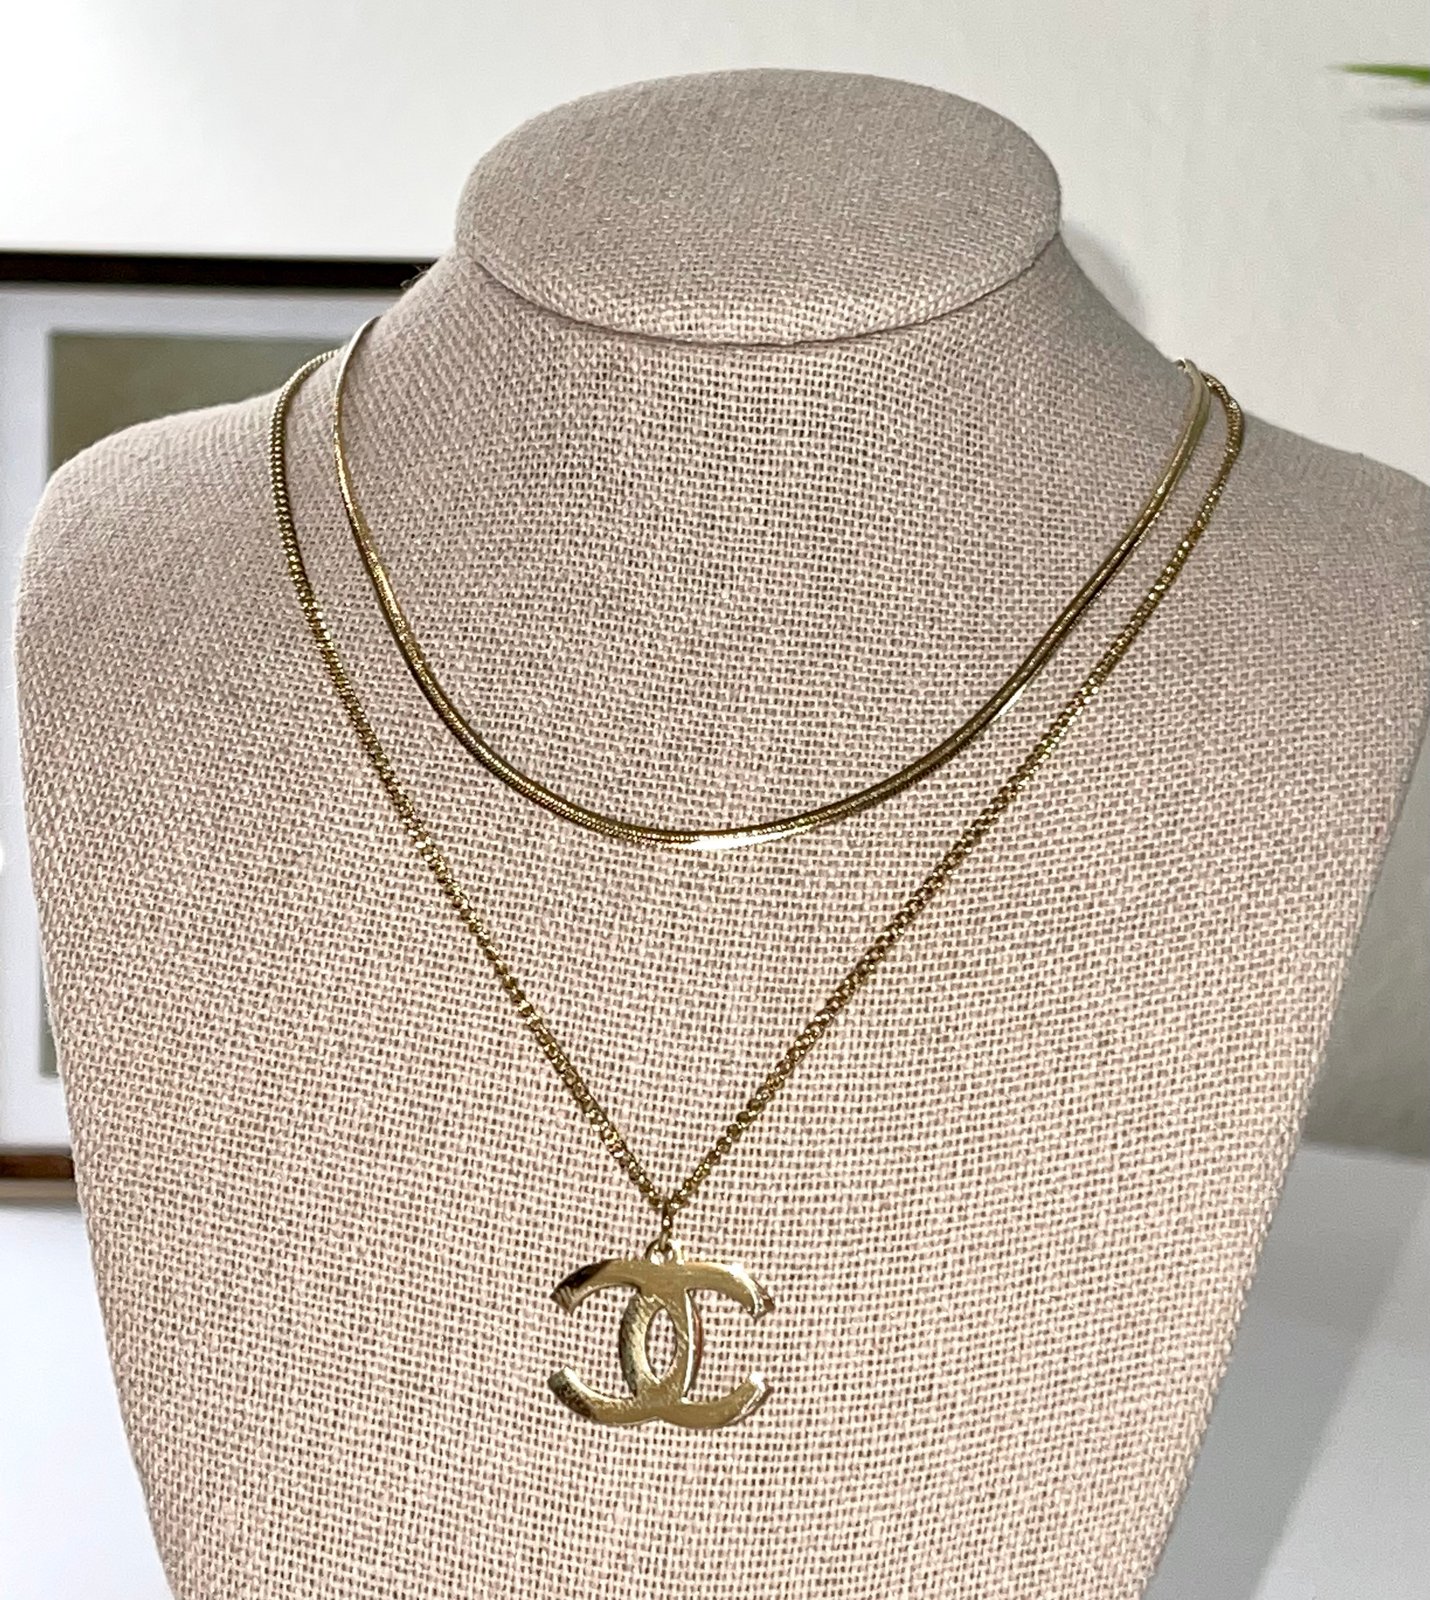 Cc necklace Chanel Silver in Metal - 7488379